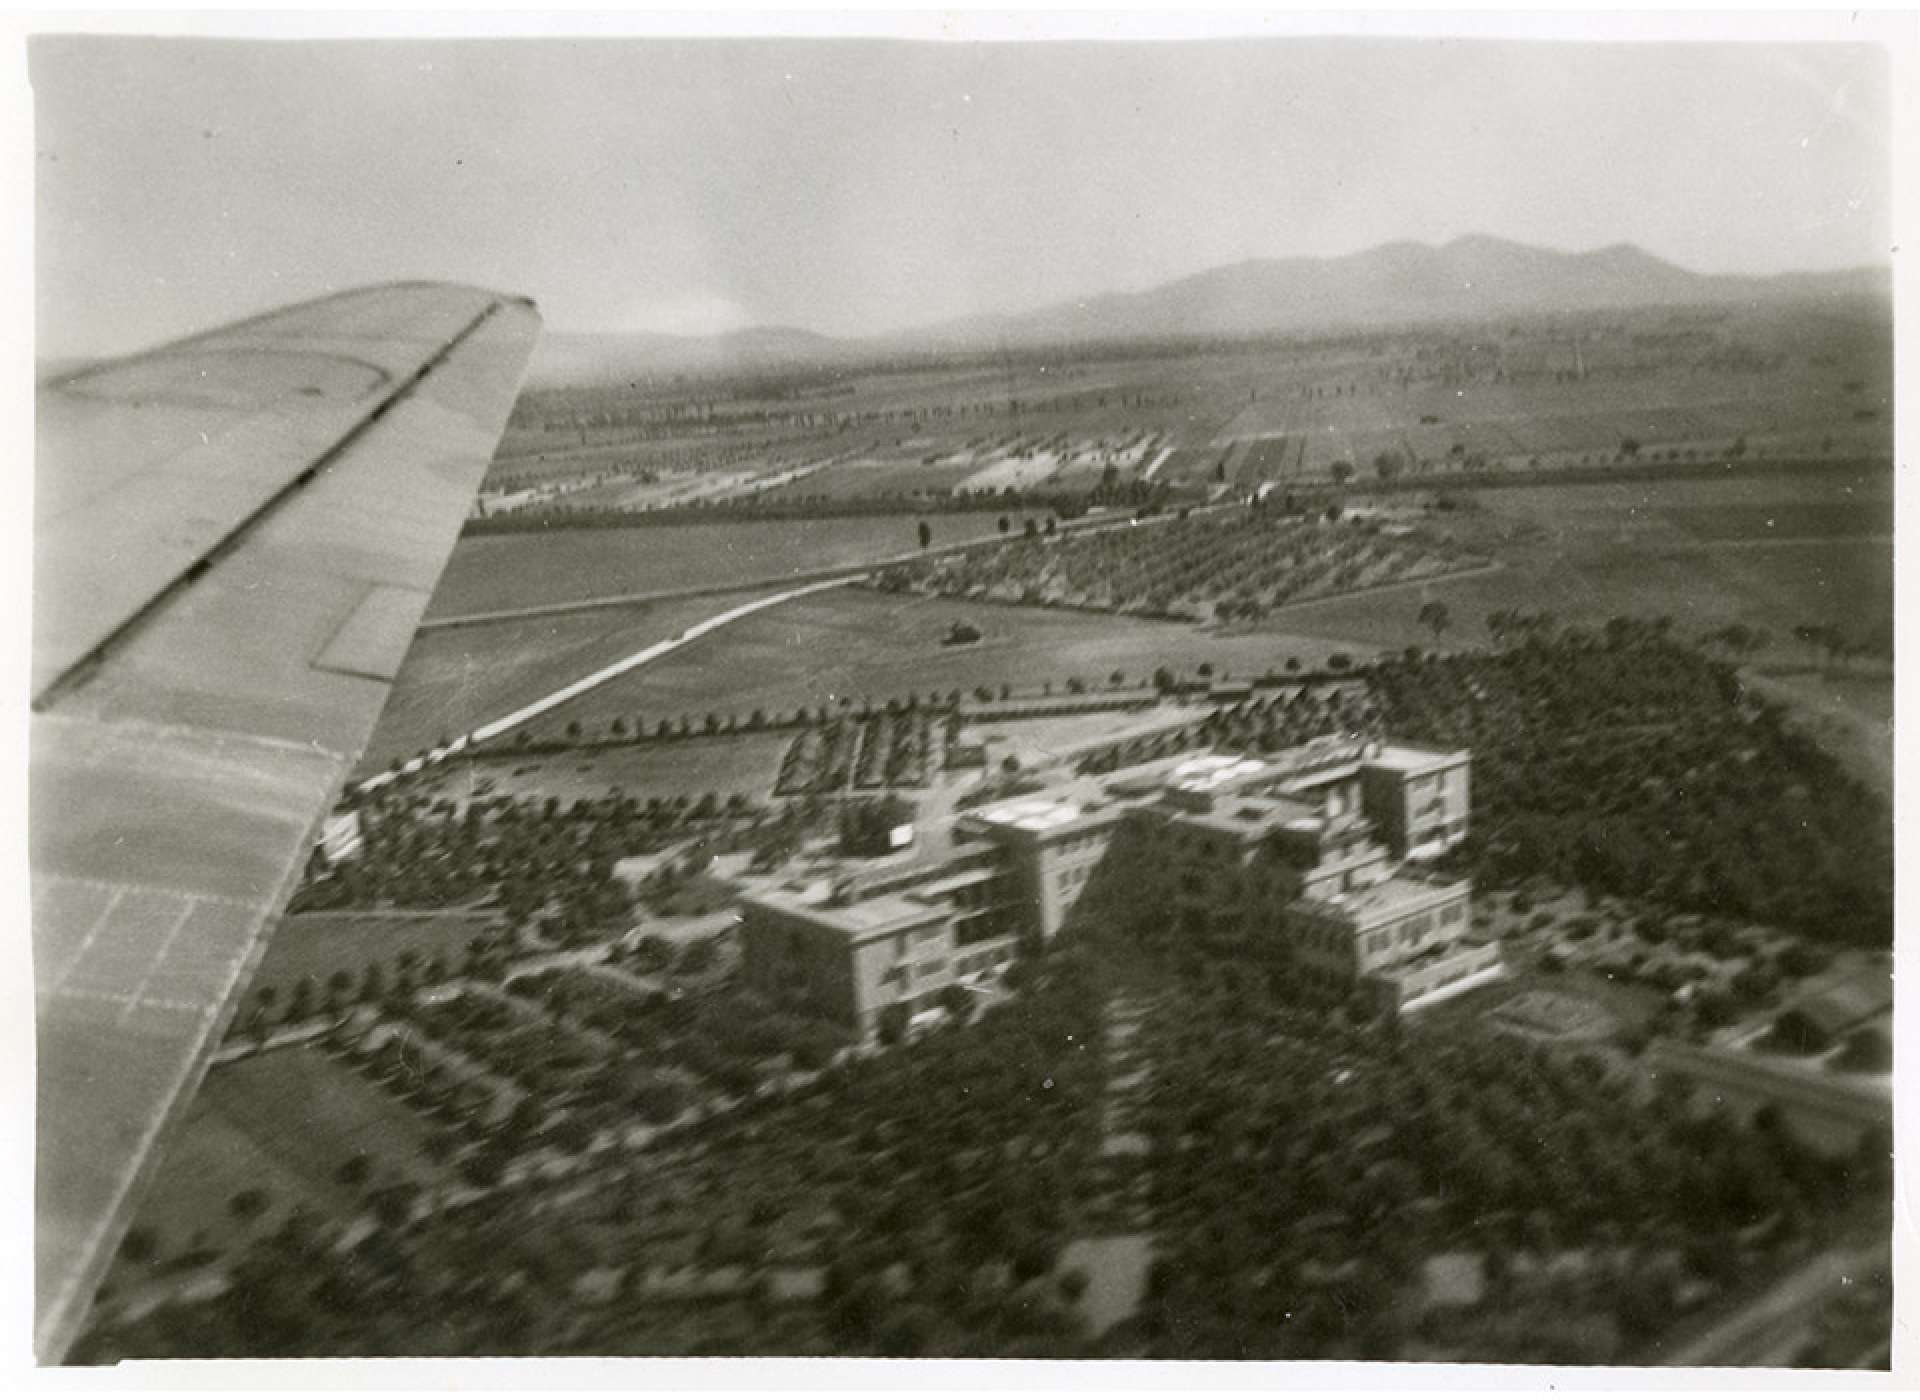 An aerial view of rear of the main building of the 24th General Hospital in Grosseto, Italy. The National WWII Museum.